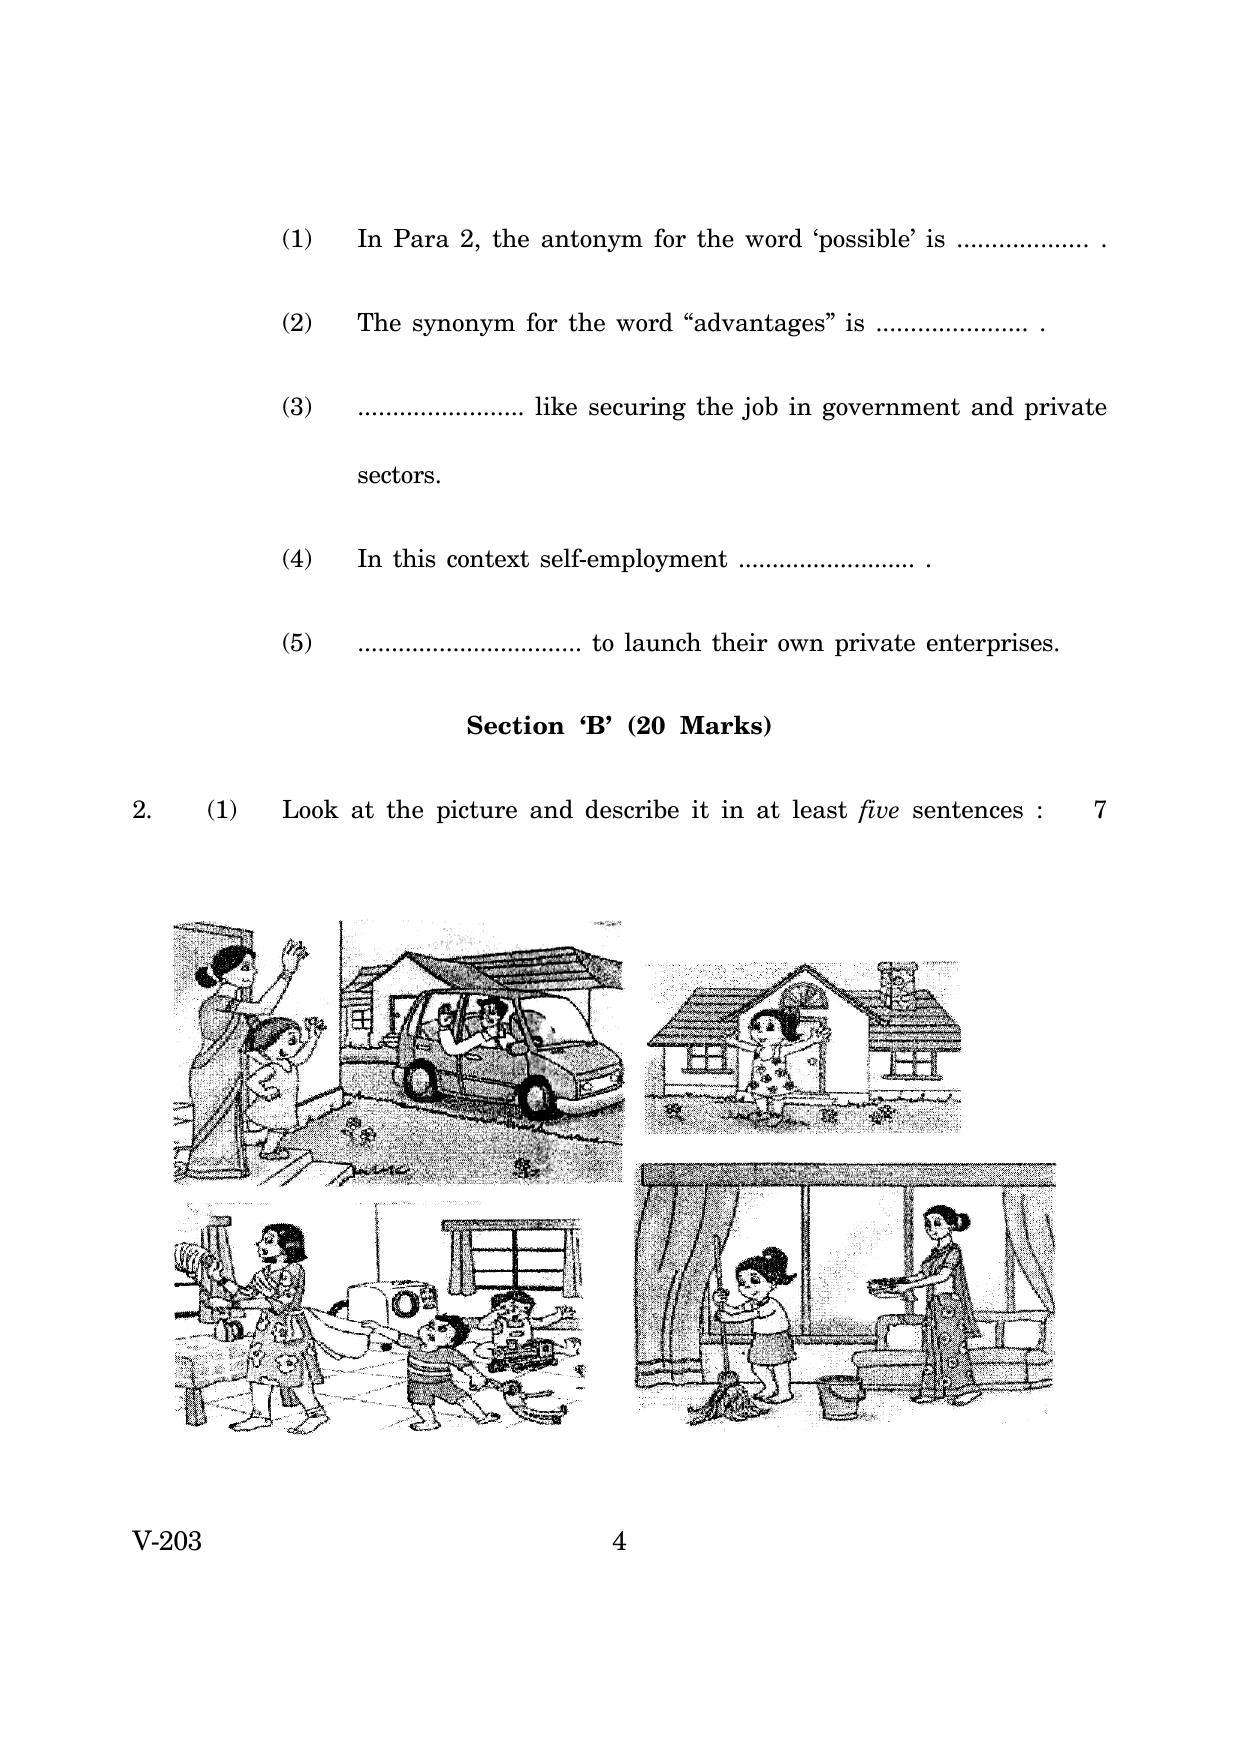 Goa Board Class 12 English Communication Skills  2019_0 (March 2019_0) Question Paper - Page 4